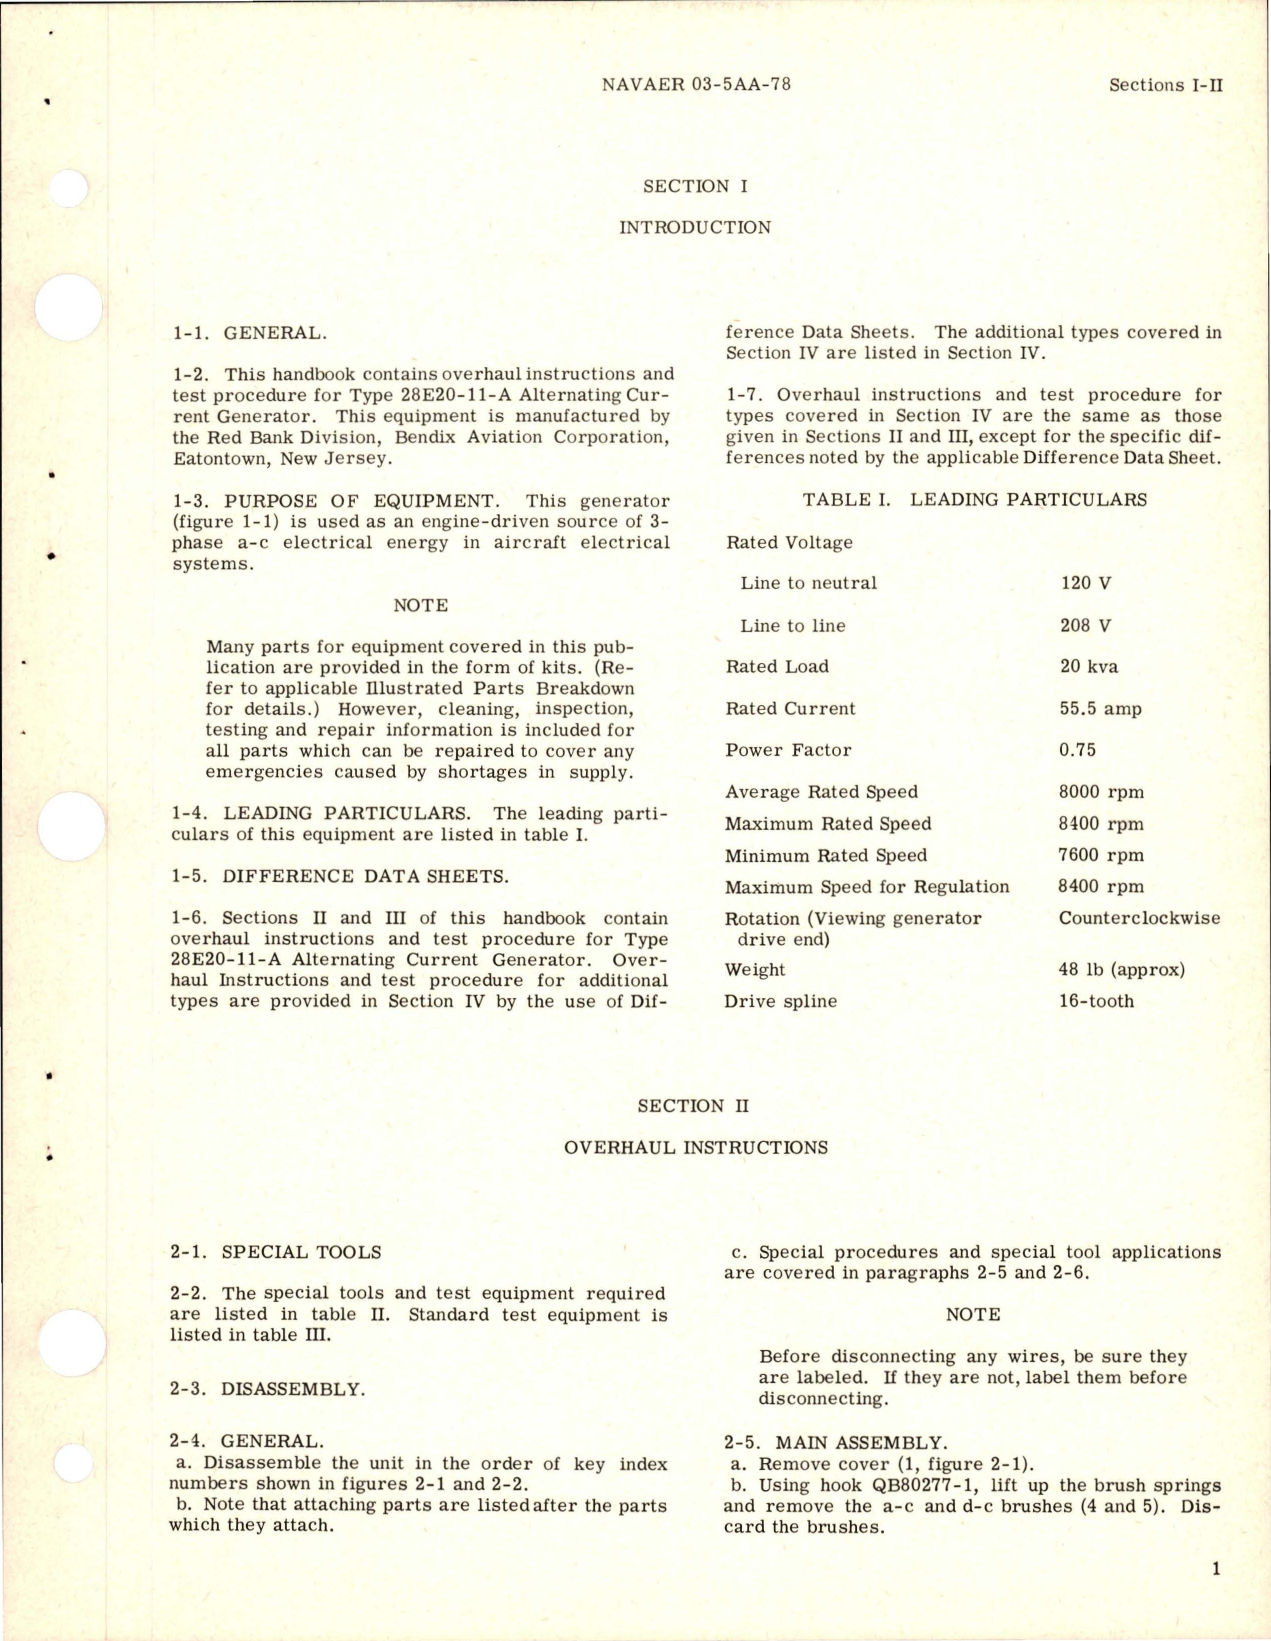 Sample page 5 from AirCorps Library document: Overhaul Instructions for Alternating Current Generator - Types 28E20-11-A and 28E20-13-A